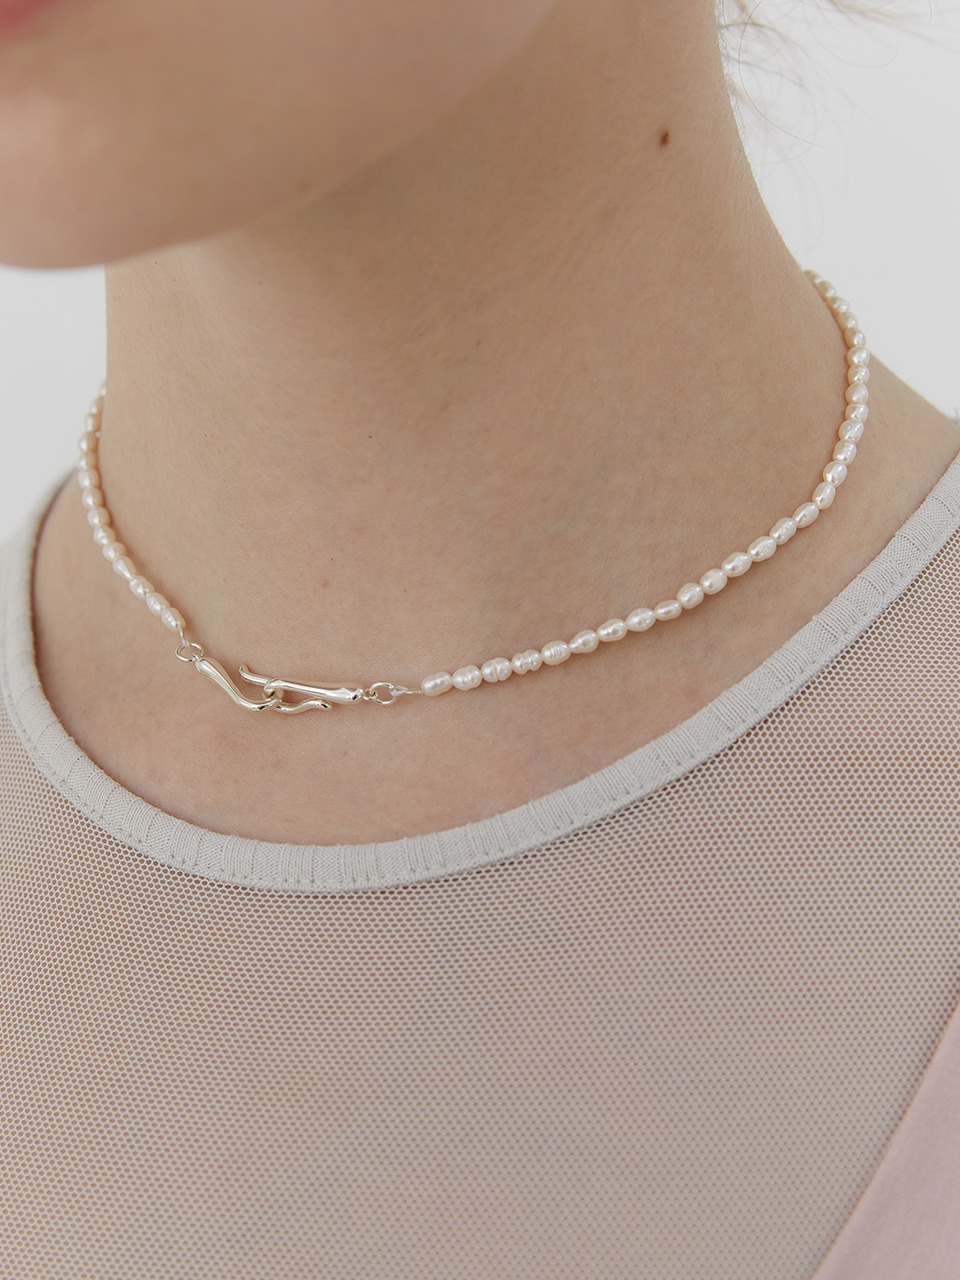 [silver925]connecting link pearl necklace